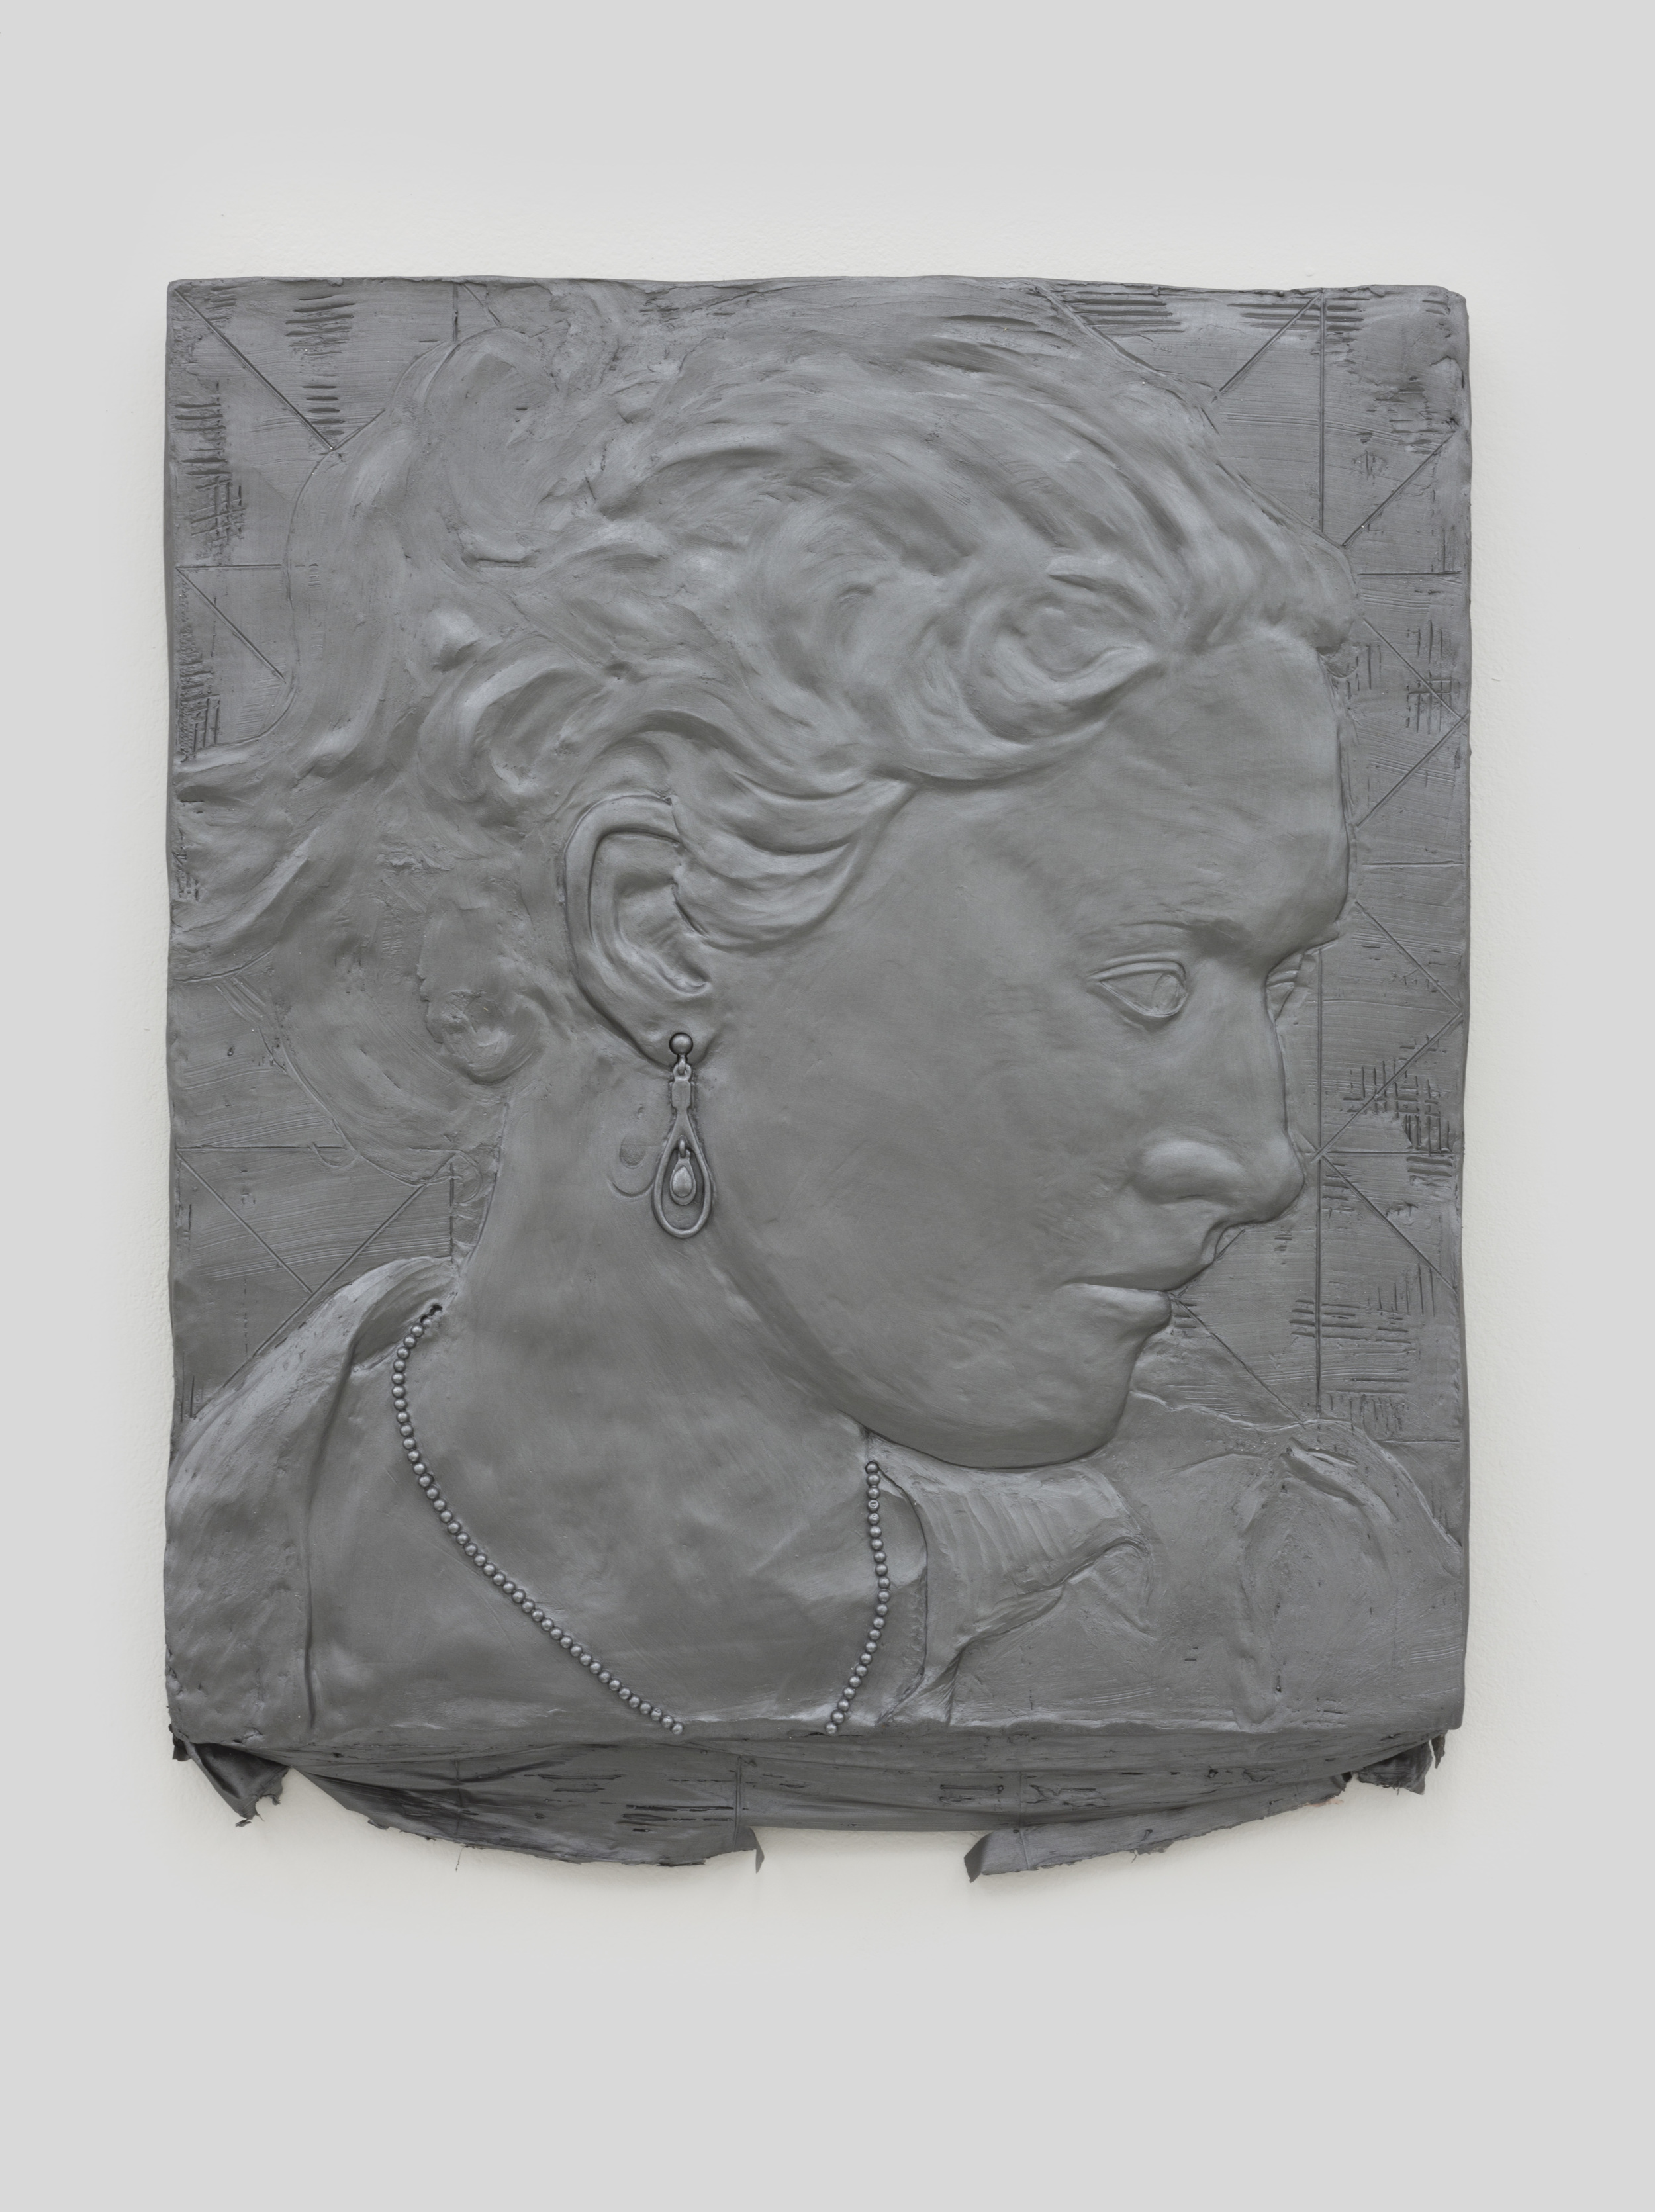   Annie , 2014 Acrylic paint, gypsum cement, fiberglass cloth, and wood 22 x 20 x 2 inches 